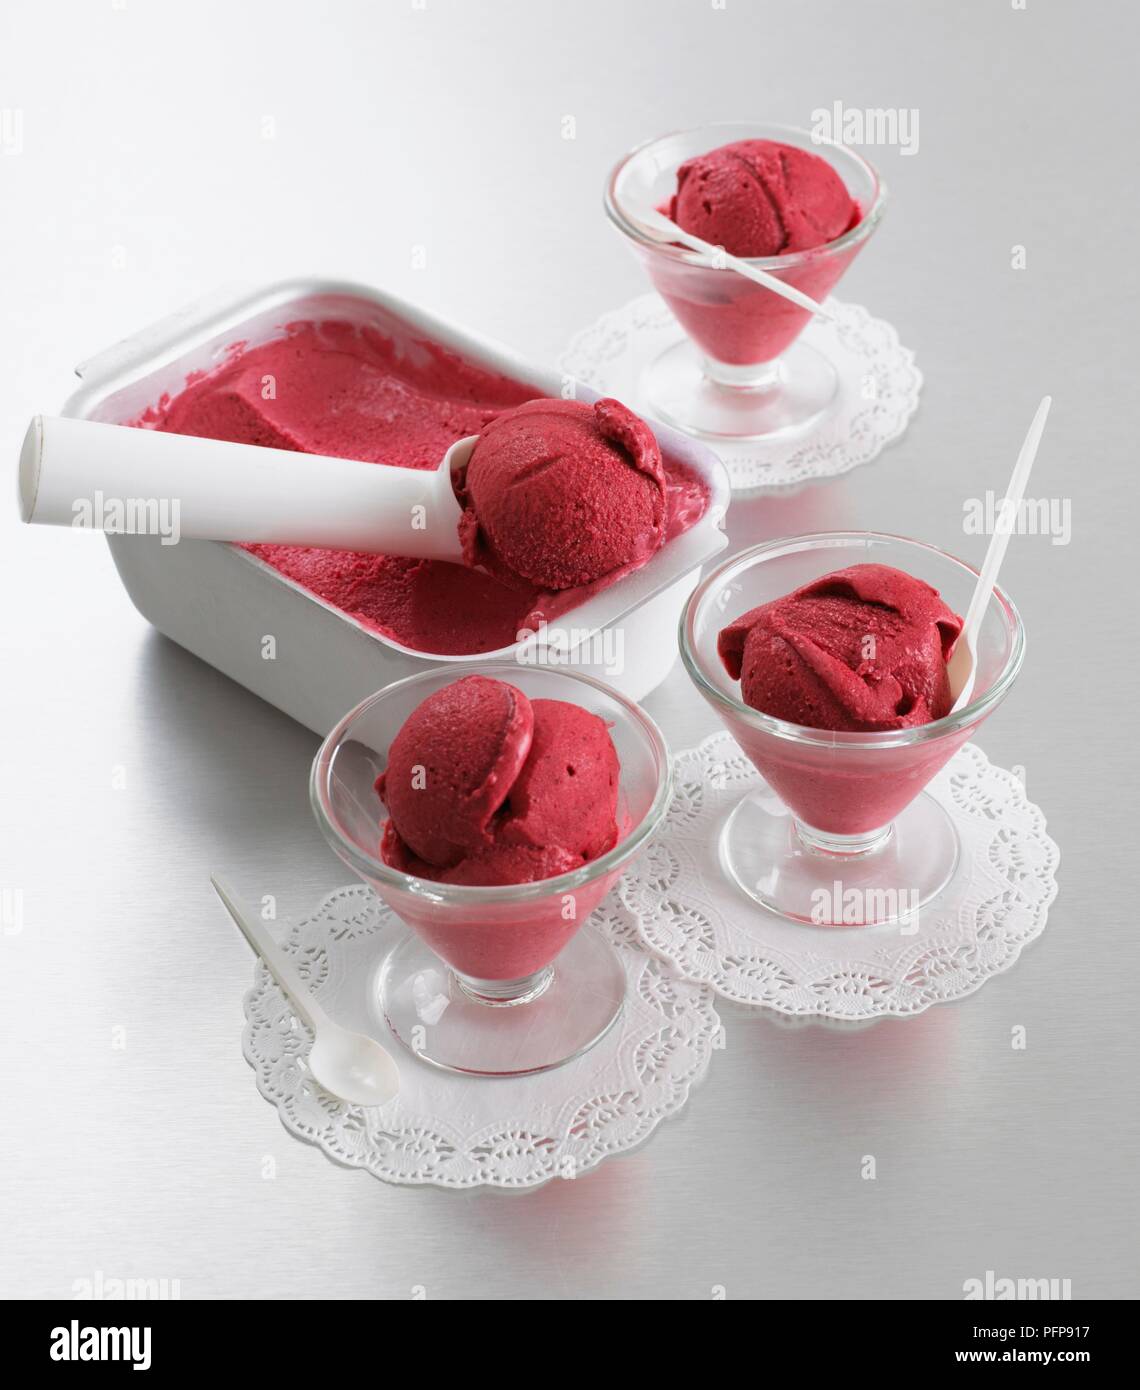 https://c8.alamy.com/comp/PFP917/raspberry-sorbet-in-dish-with-scoop-and-served-in-sorbet-glasses-on-doilies-PFP917.jpg